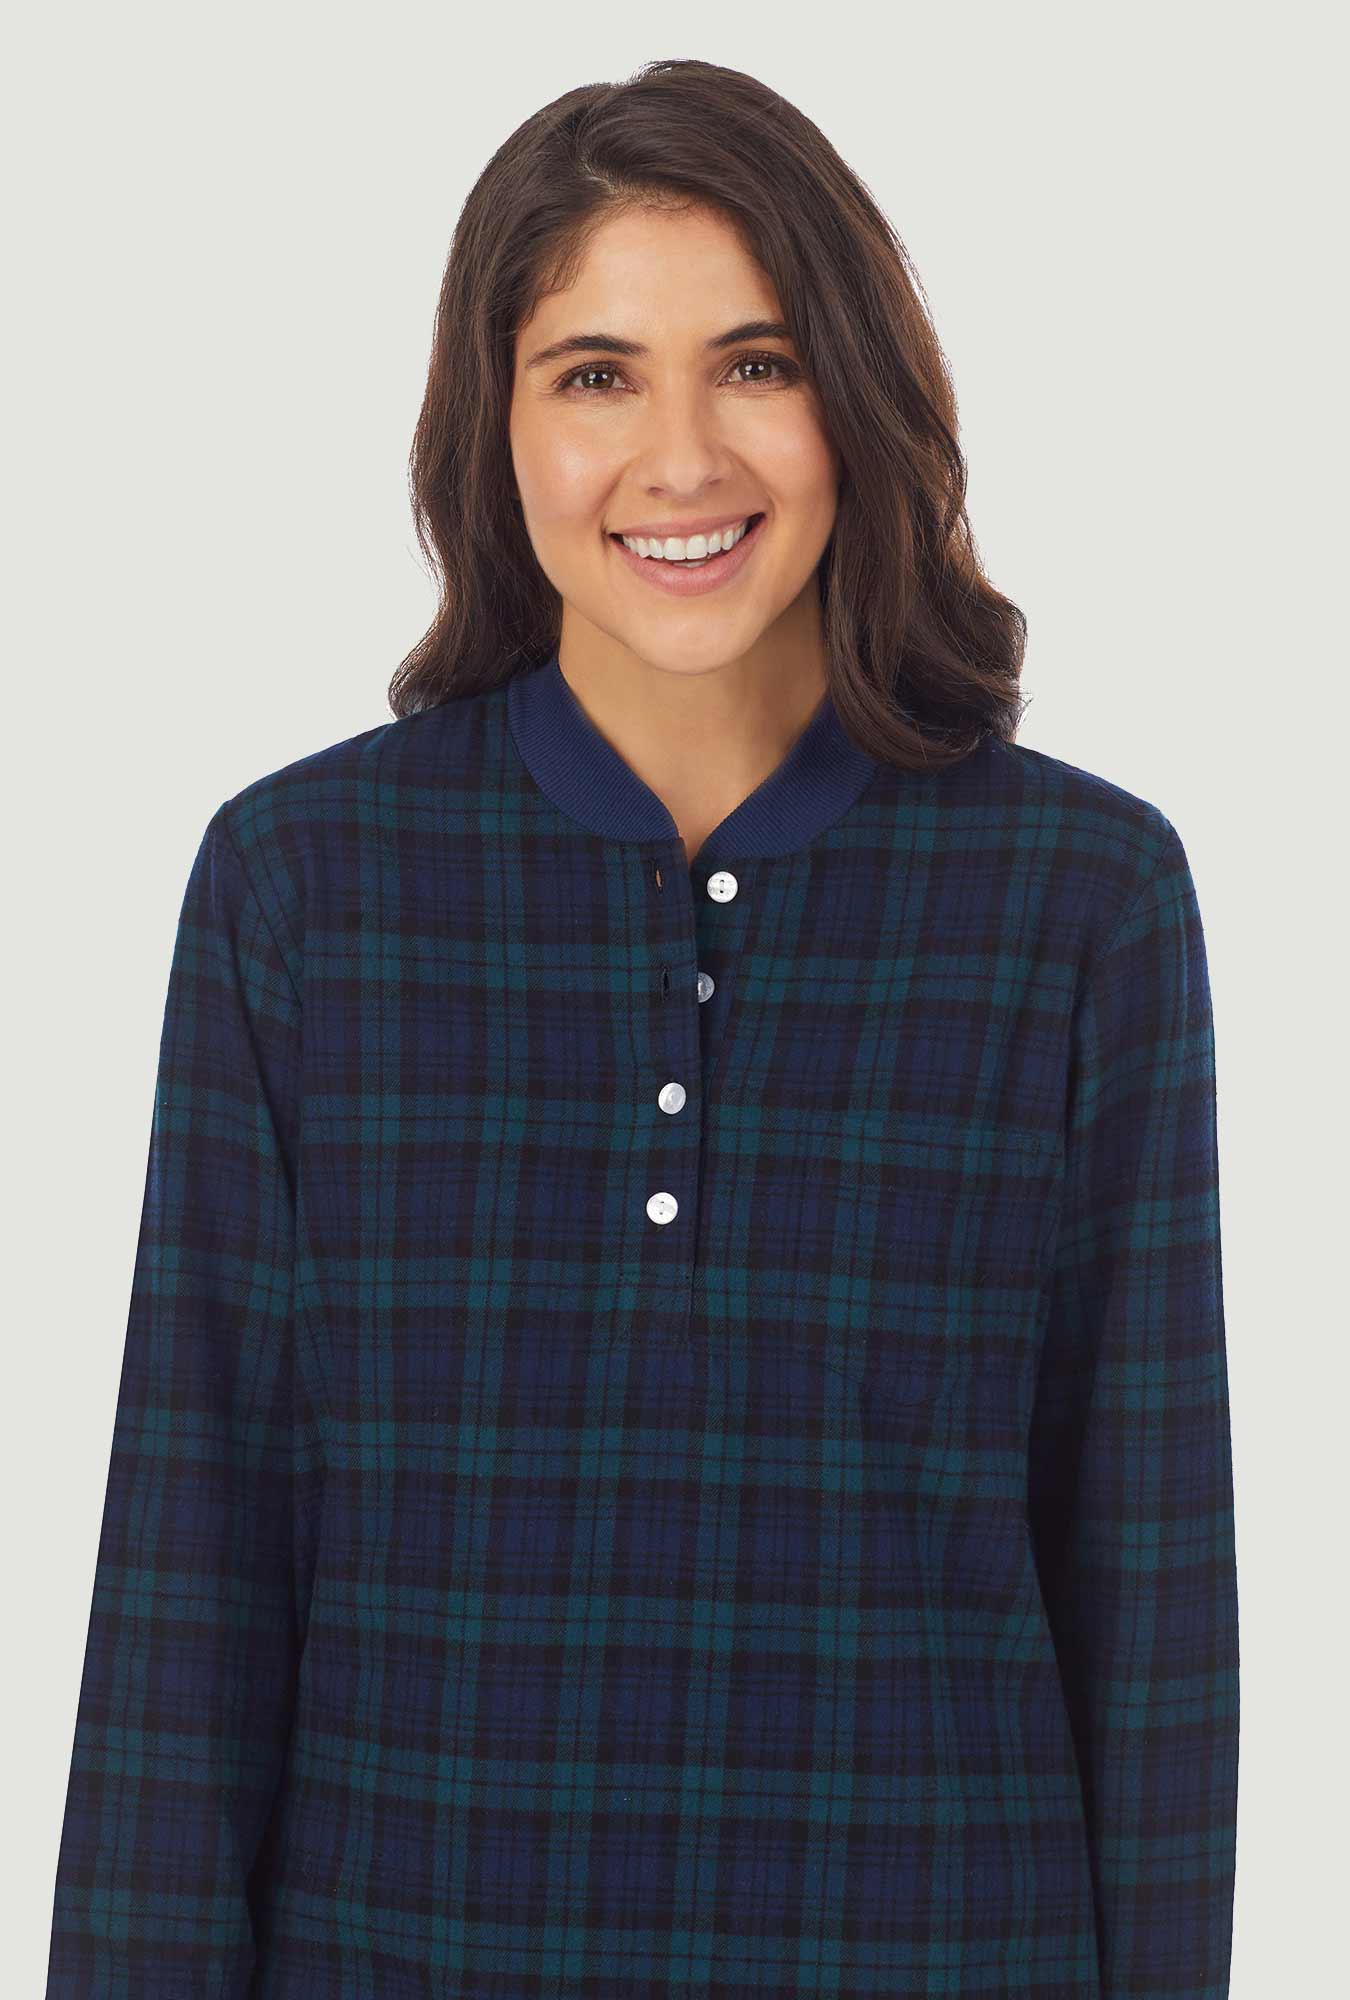 A lady wearing a long sleeve pajama with black watch plaid  pattern.